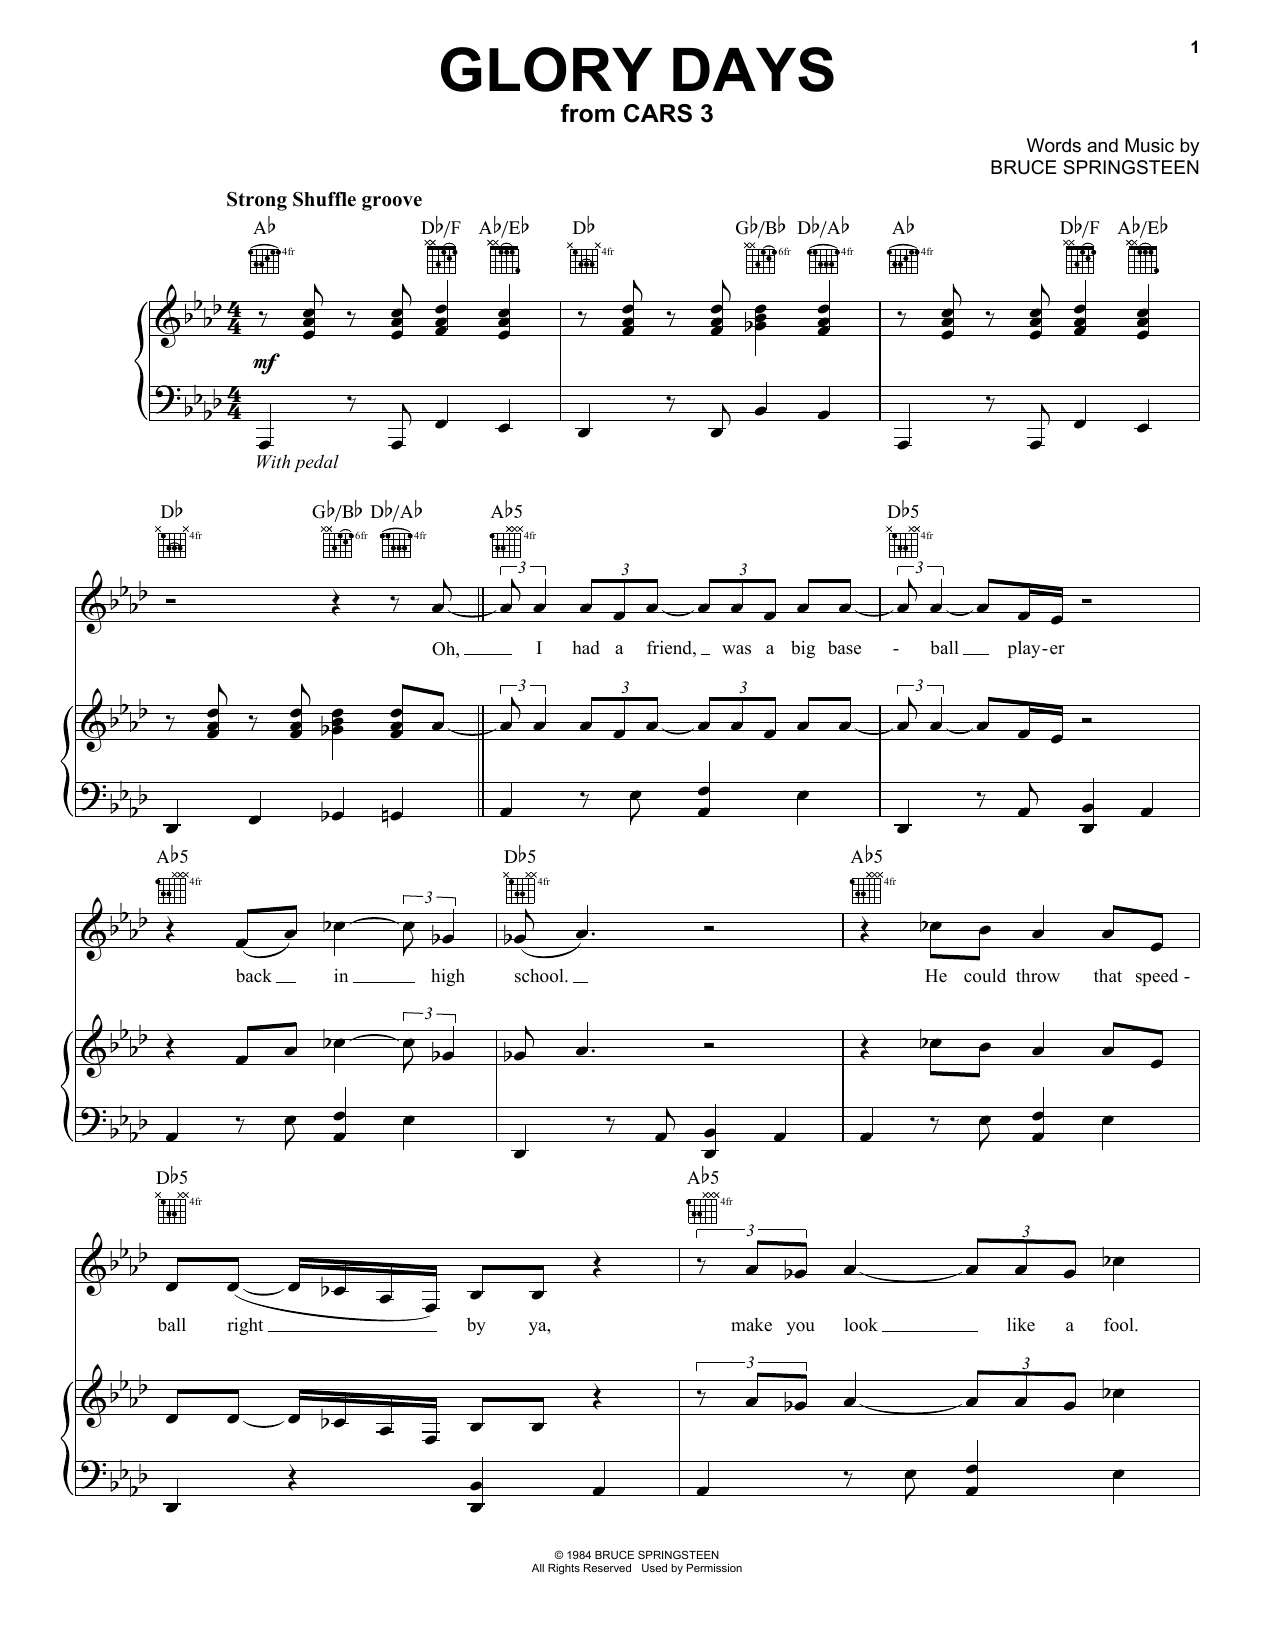 Download Bruce Springsteen Glory Days Sheet Music